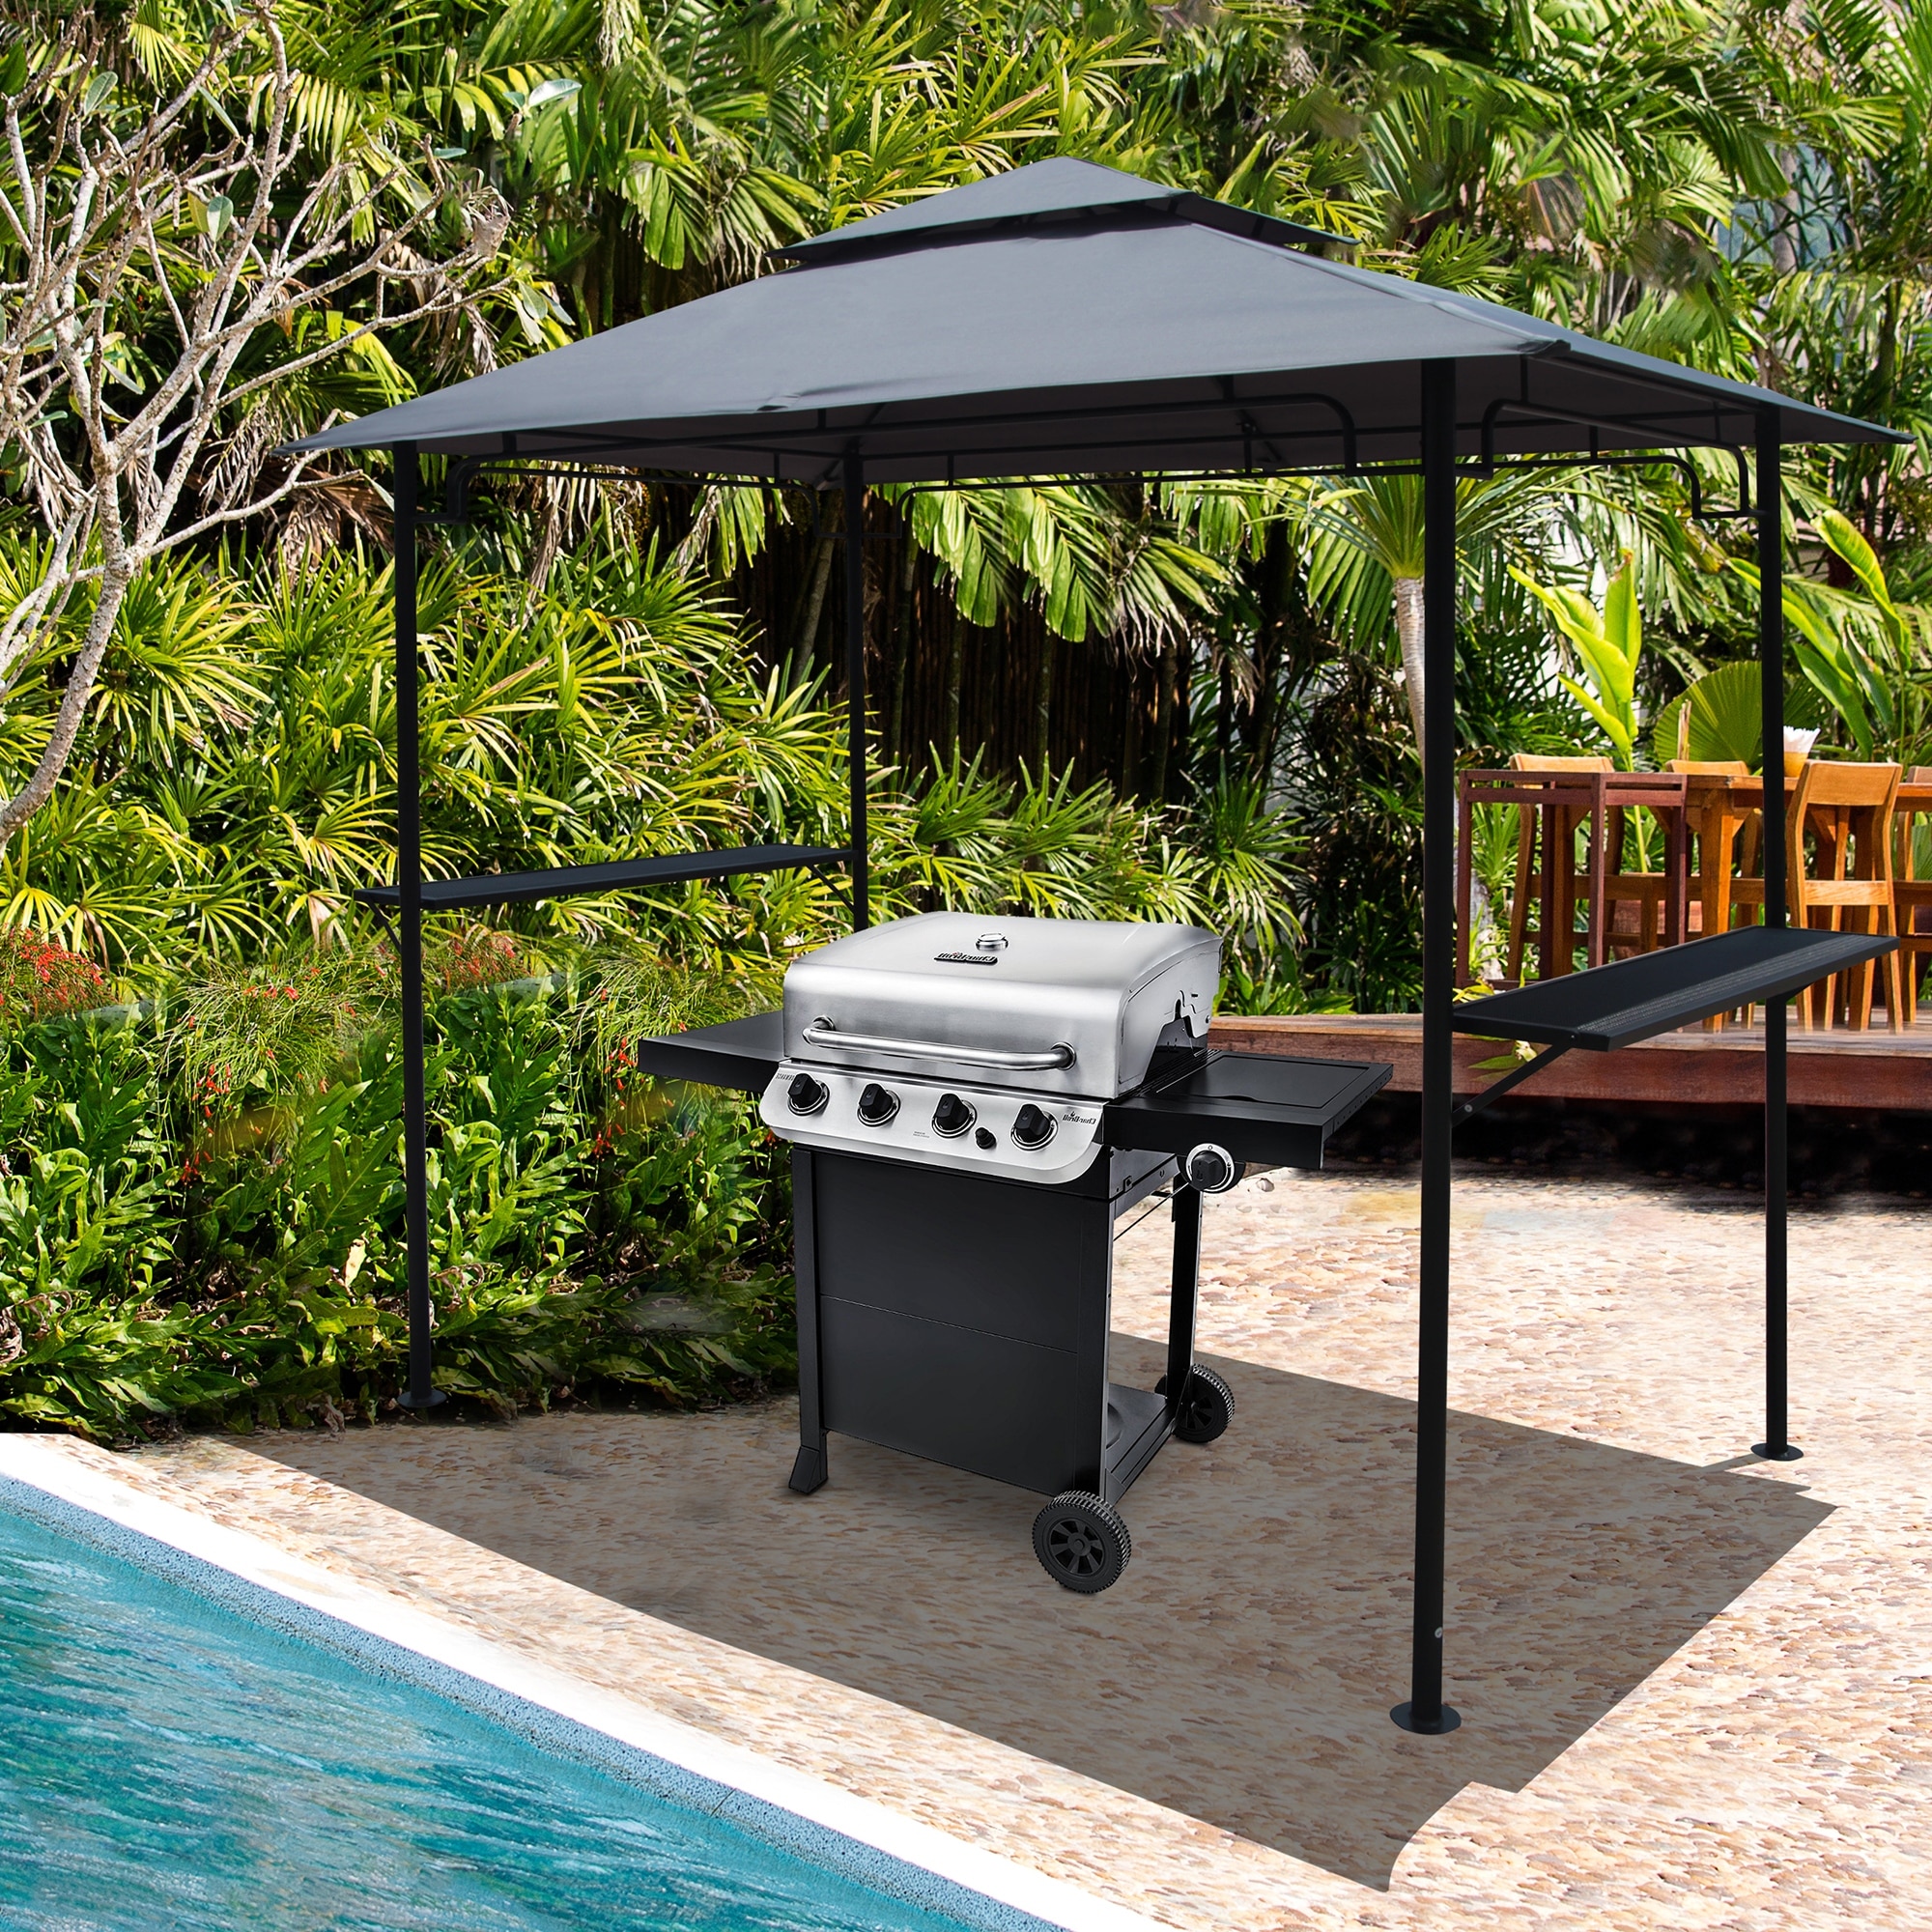 Grand Patio Grill Gazebo 8 x 5 FT,Patio Canopy Shelter for Outdoor BBQ,Water Resistance Gazebo Tent Champagne